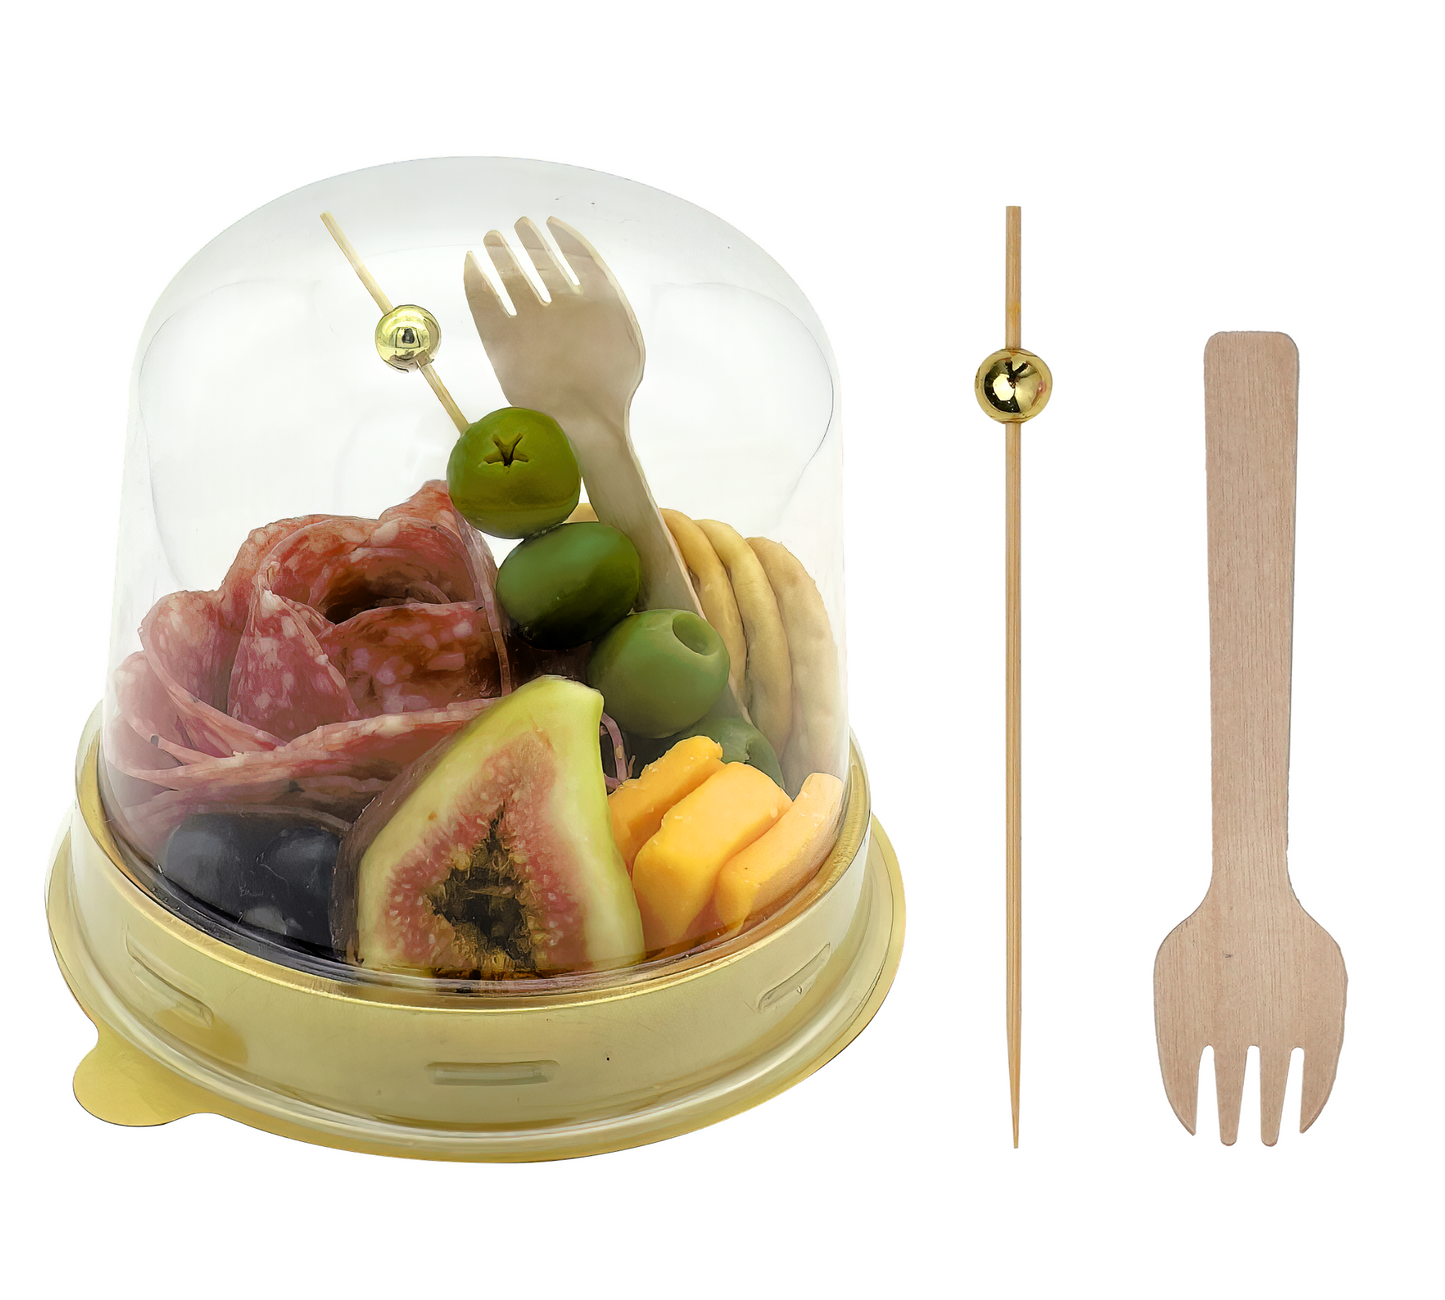 Charcuterie Dome Containers Cups with Mini Wooden Forks for Food Favor Dessert Display Individual Charcuterie Grazing Table Catering Wedding